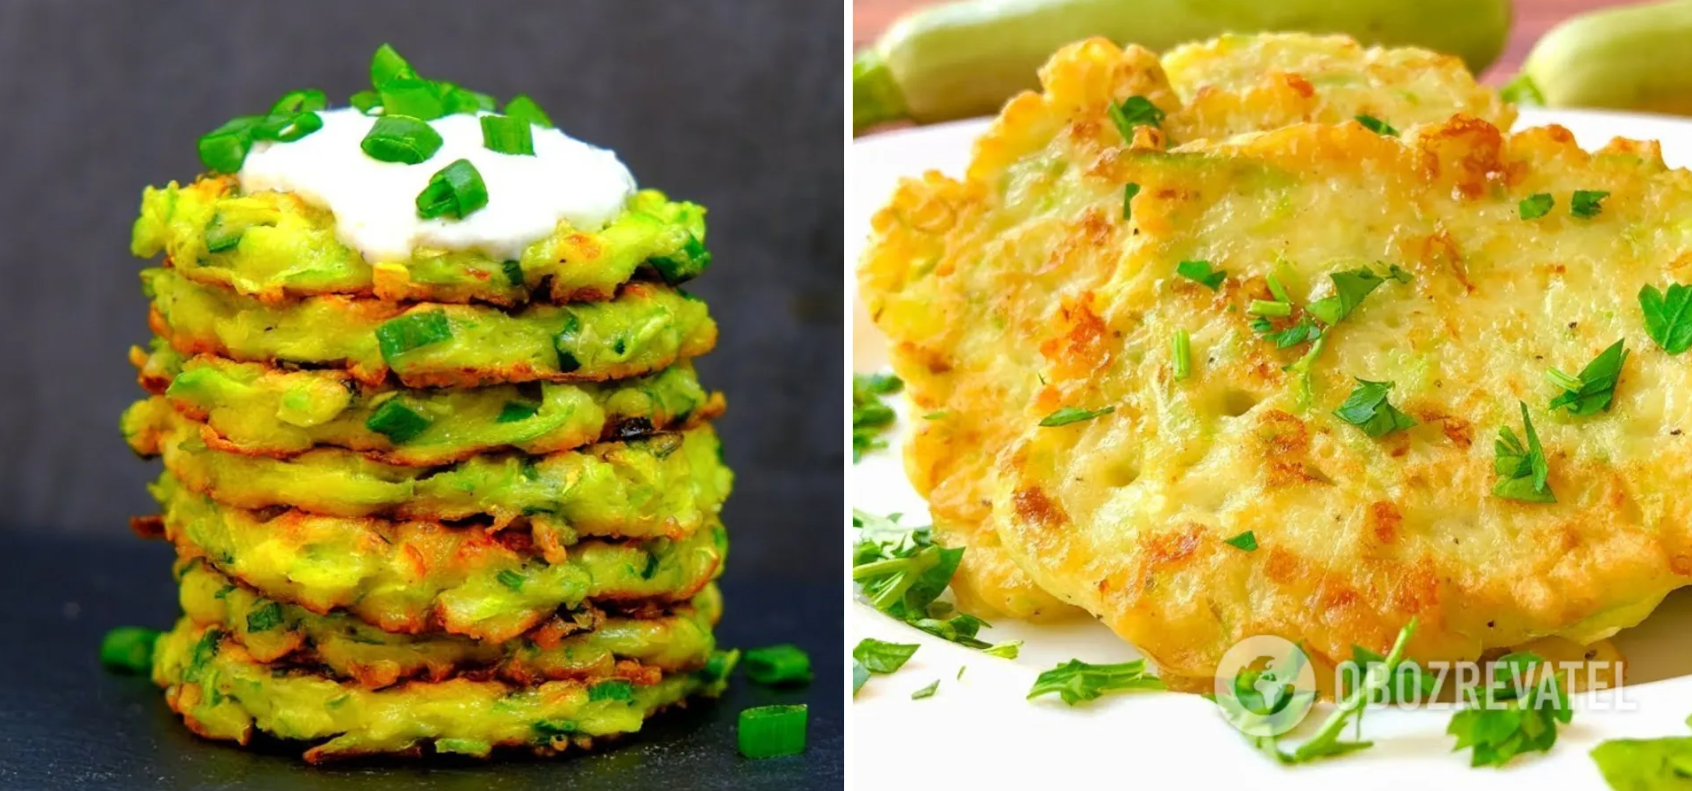 Zucchini pancakes in 5 minutes